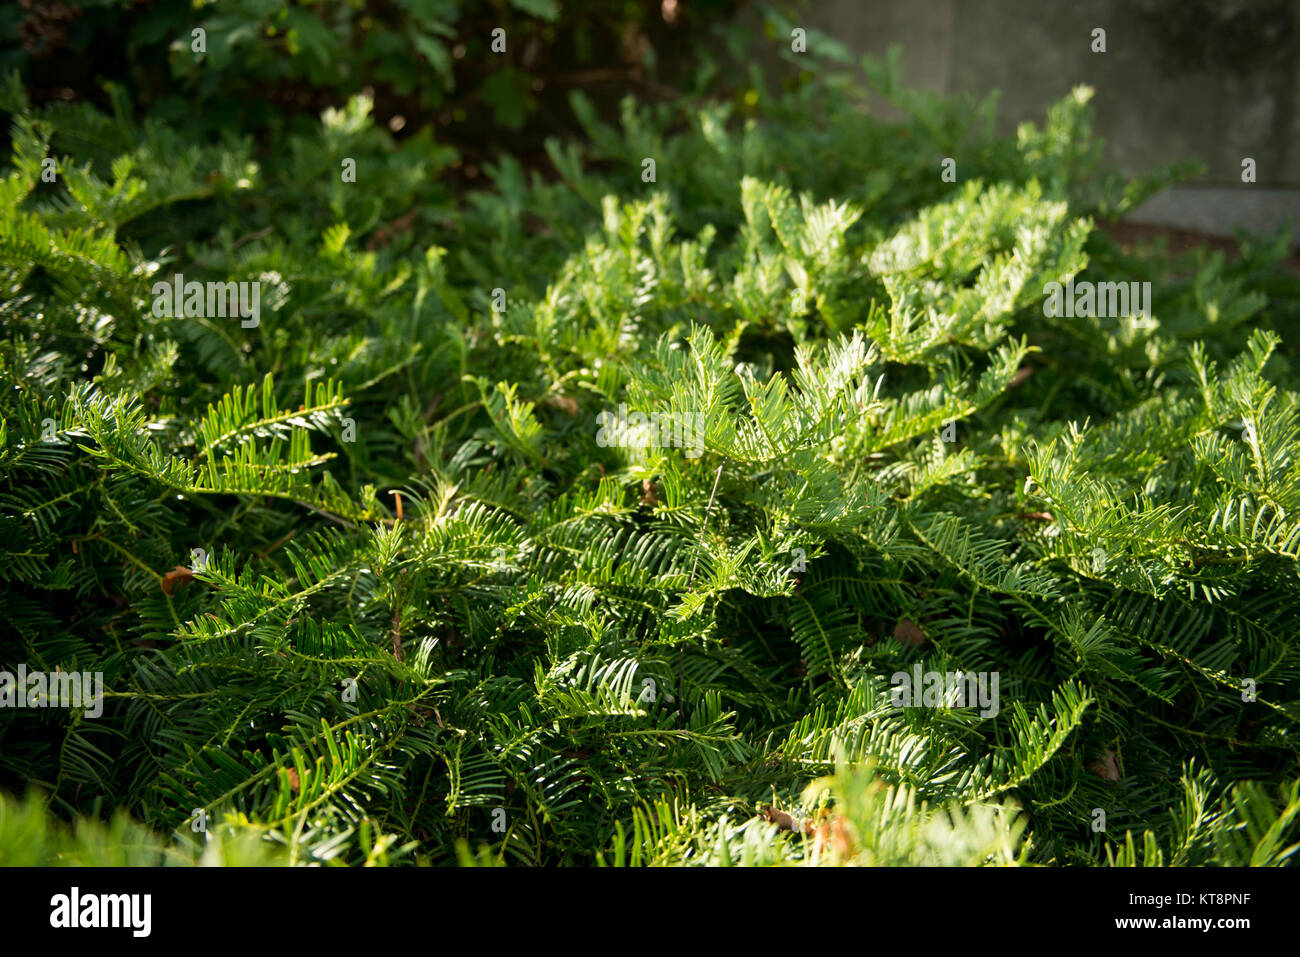 Cephalotaxus shrubs grow in Columbarium Court 3 in Arlington National Cemetery, Sept. 9, 2016, in Arlington, Va. The cemetery's 624 acres are a unique blend of formal and informal landscapes, dotted with more than 8,600 native and exotic trees. (Photo by Rachel Larue/Arlington National Cemetery/released) Stock Photo